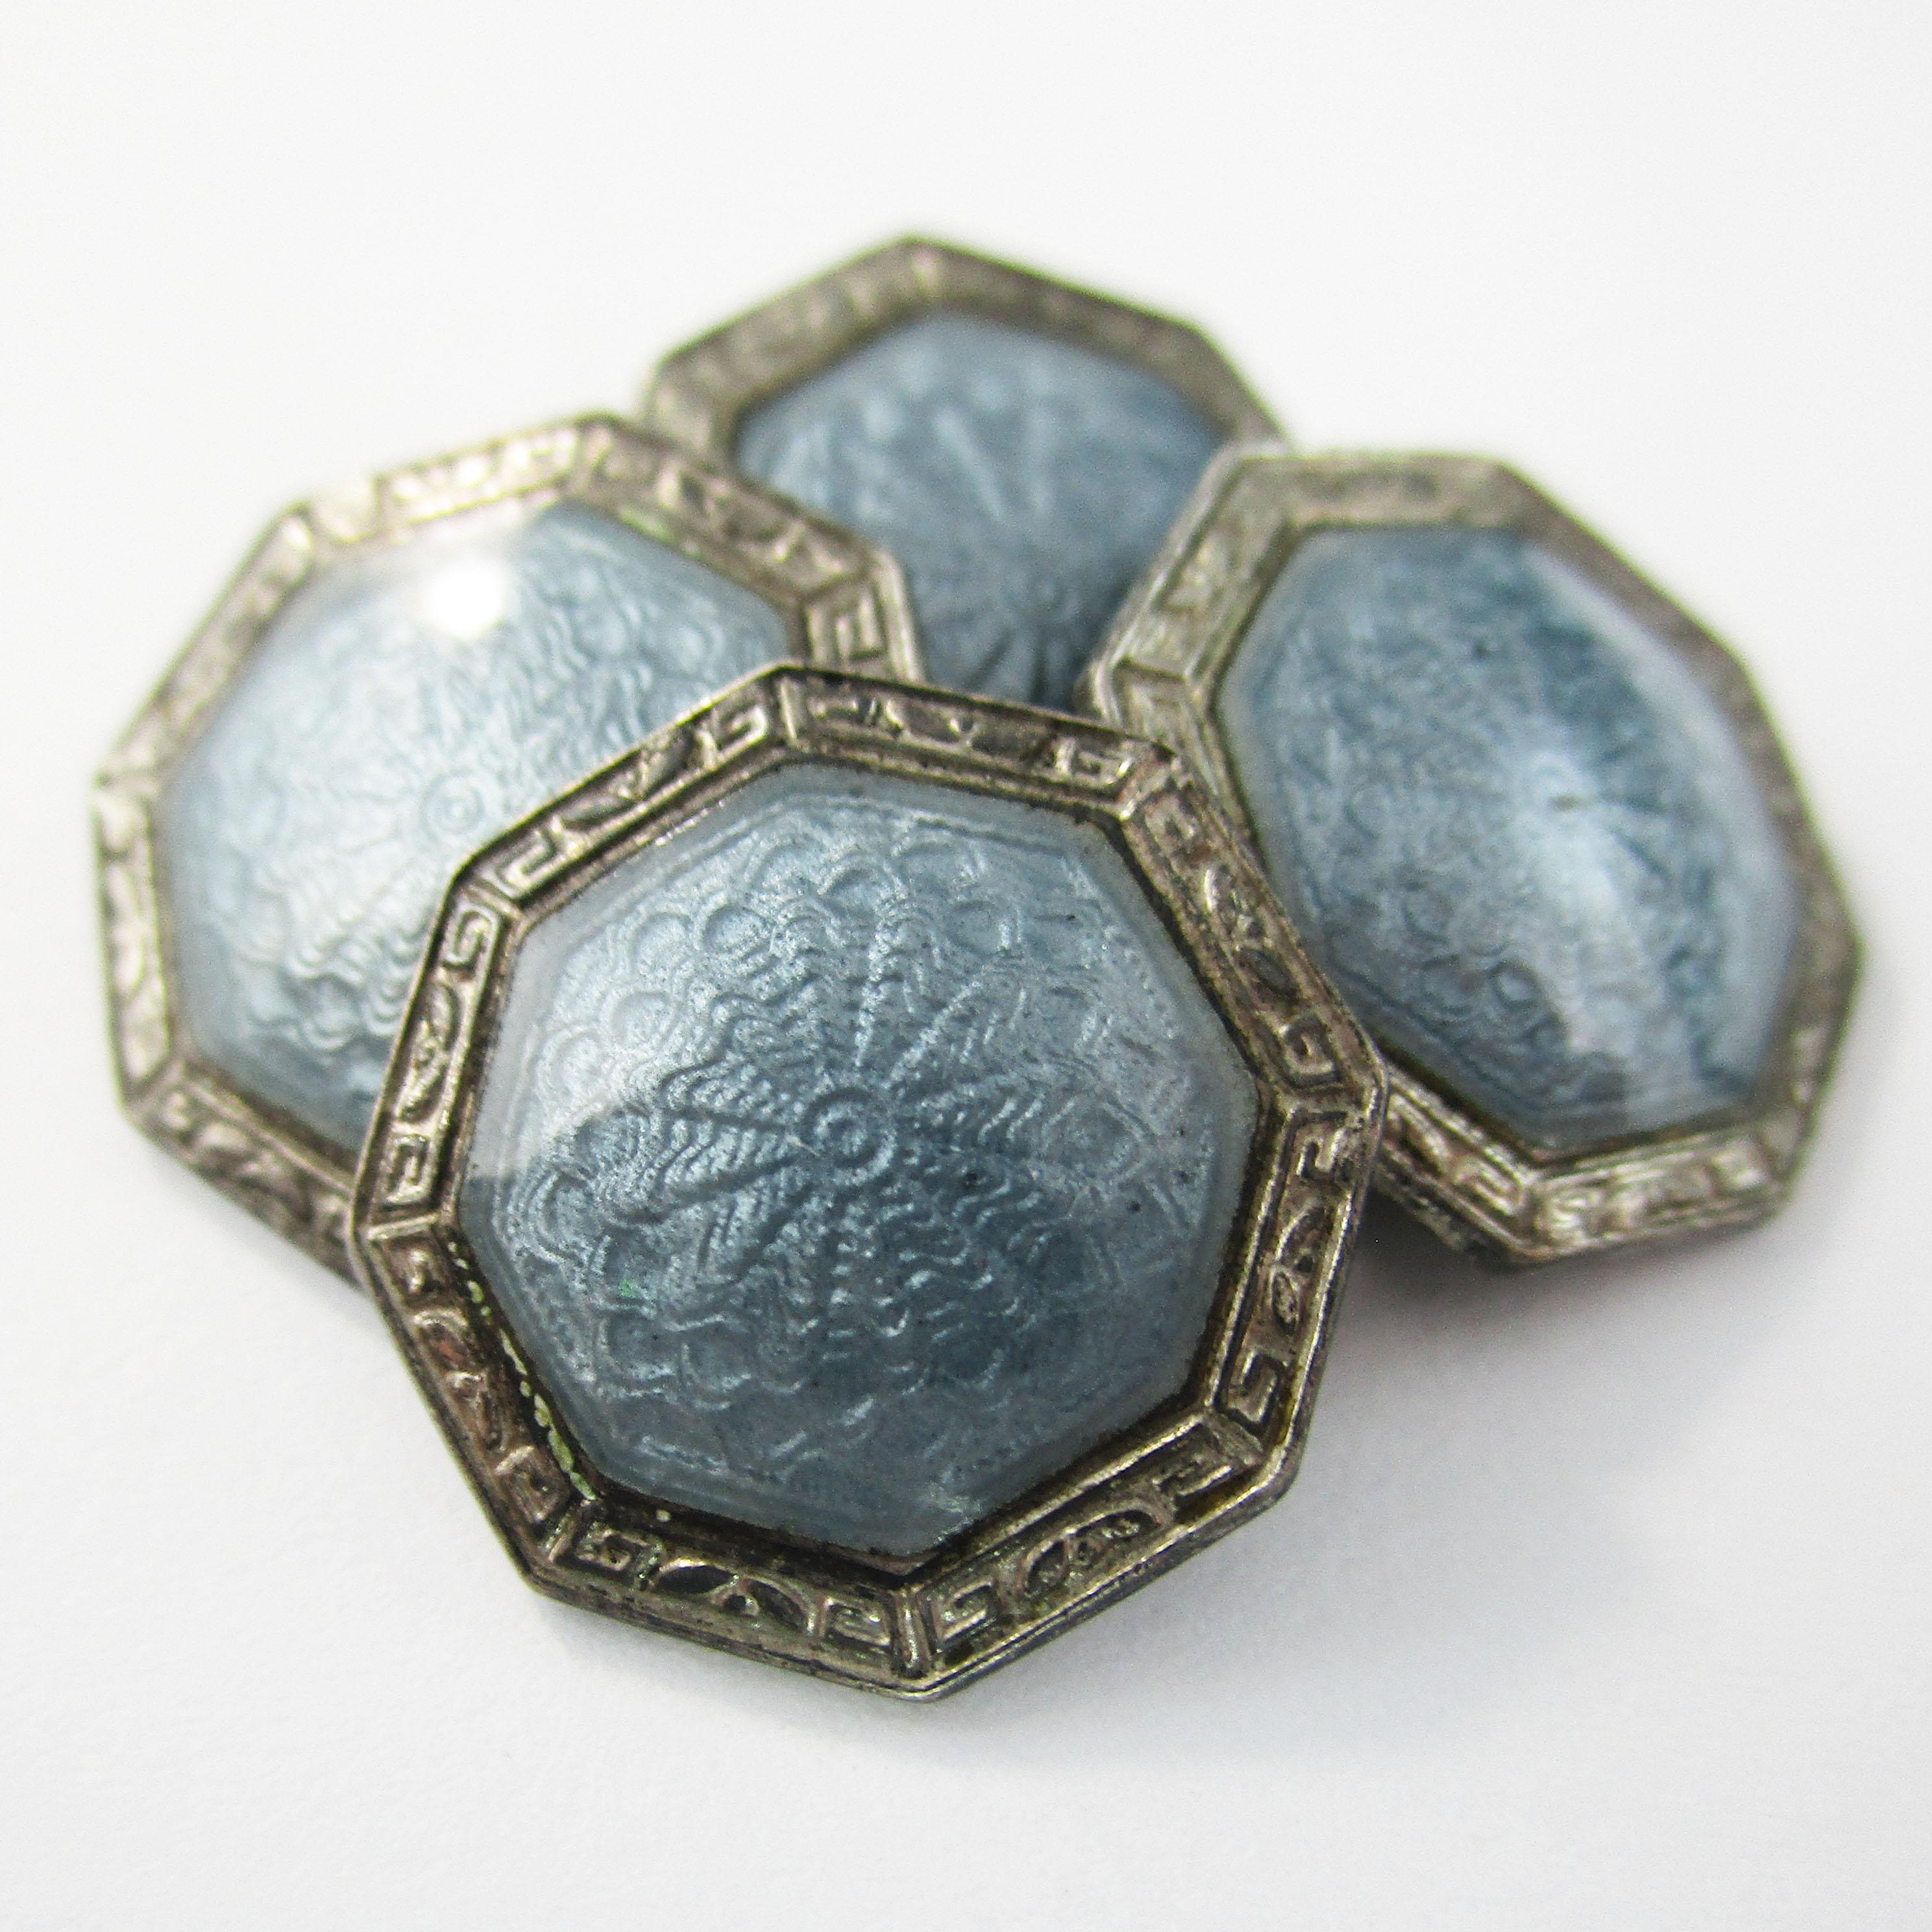 This is an excellent pair of Art Deco cufflinks in sterling silver with gorgeous gray guilloche enamel panels. The enamel is in incredible condition and has a subtlety of detail that creates a reflective, dimensional appearance. The enamel has a